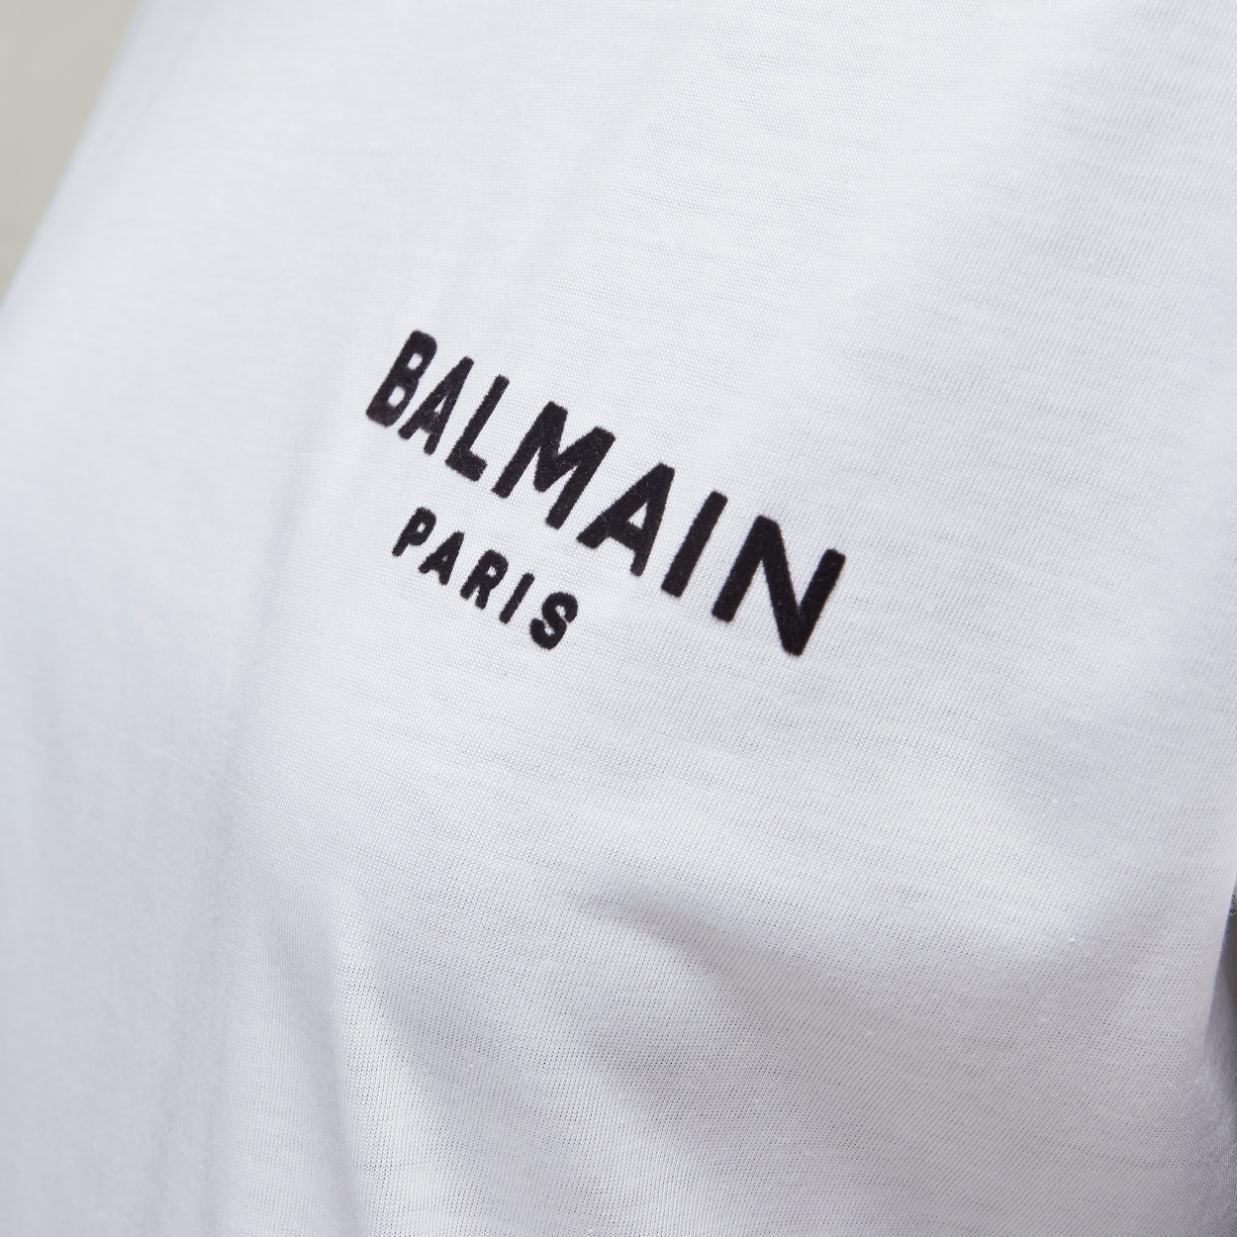 BALMAIN signature logo print cuffed sleeves white cotton tshirt XXS
Reference: AAWC/A00769
Brand: Balmain
Designer: Olivier Rousteing
Material: Cotton
Color: White, Black
Pattern: Solid
Extra Details: Velvet print. Cuffed sleeves.
Made in: